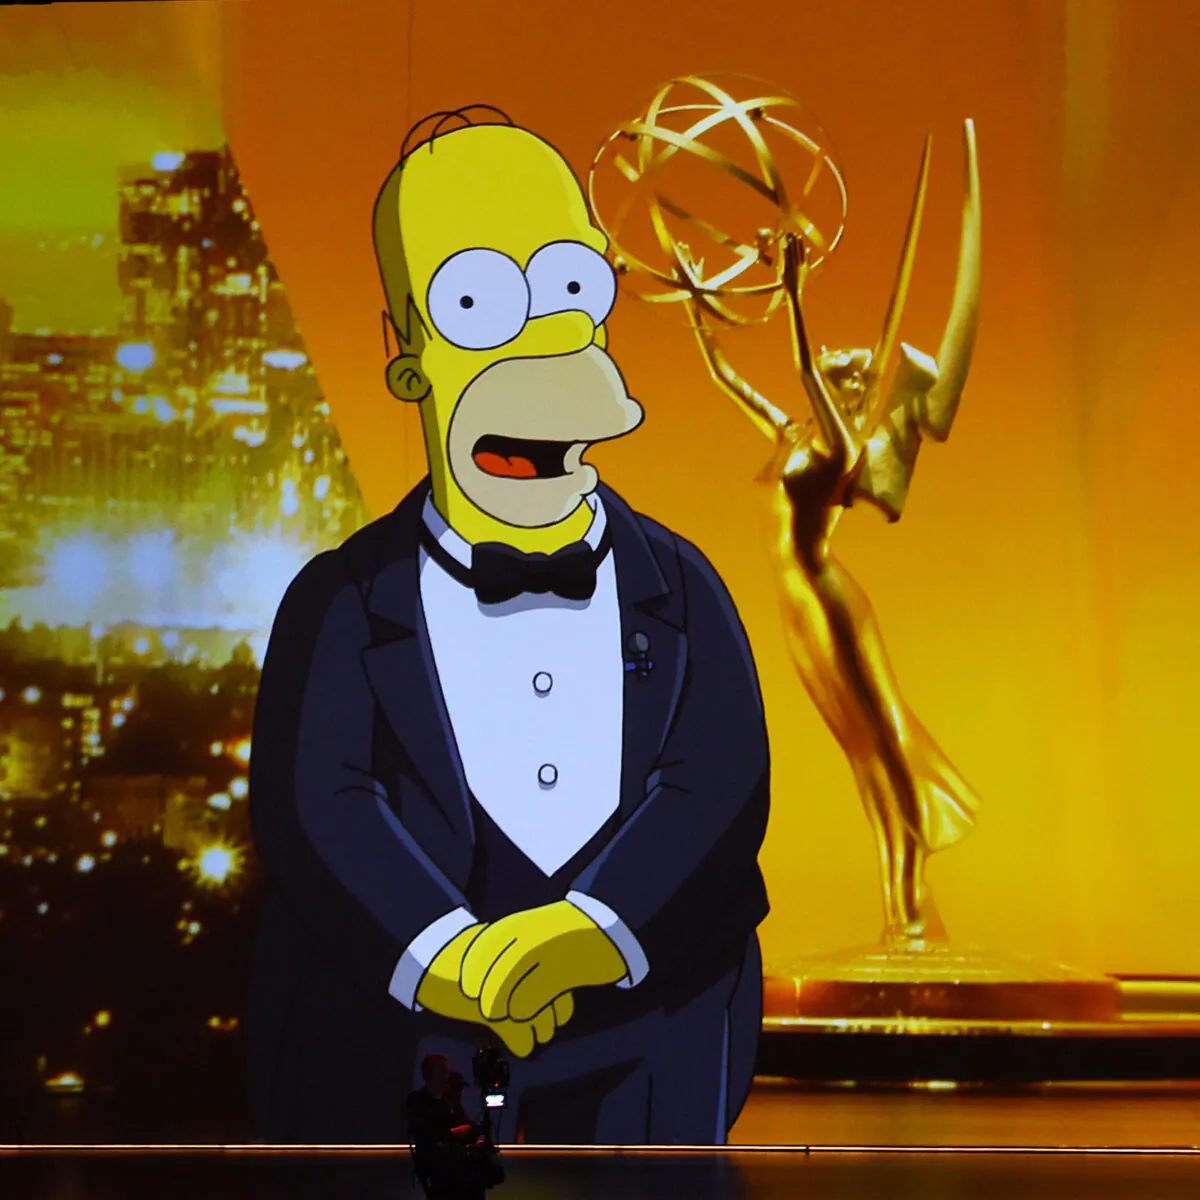 A video of Homer Simpson speaking is projected on a video screen during the 71st Emmy Awards at Microsoft Theater in Los Angeles on Sept. 22, 2019. (Kevin Winter/Getty Images)